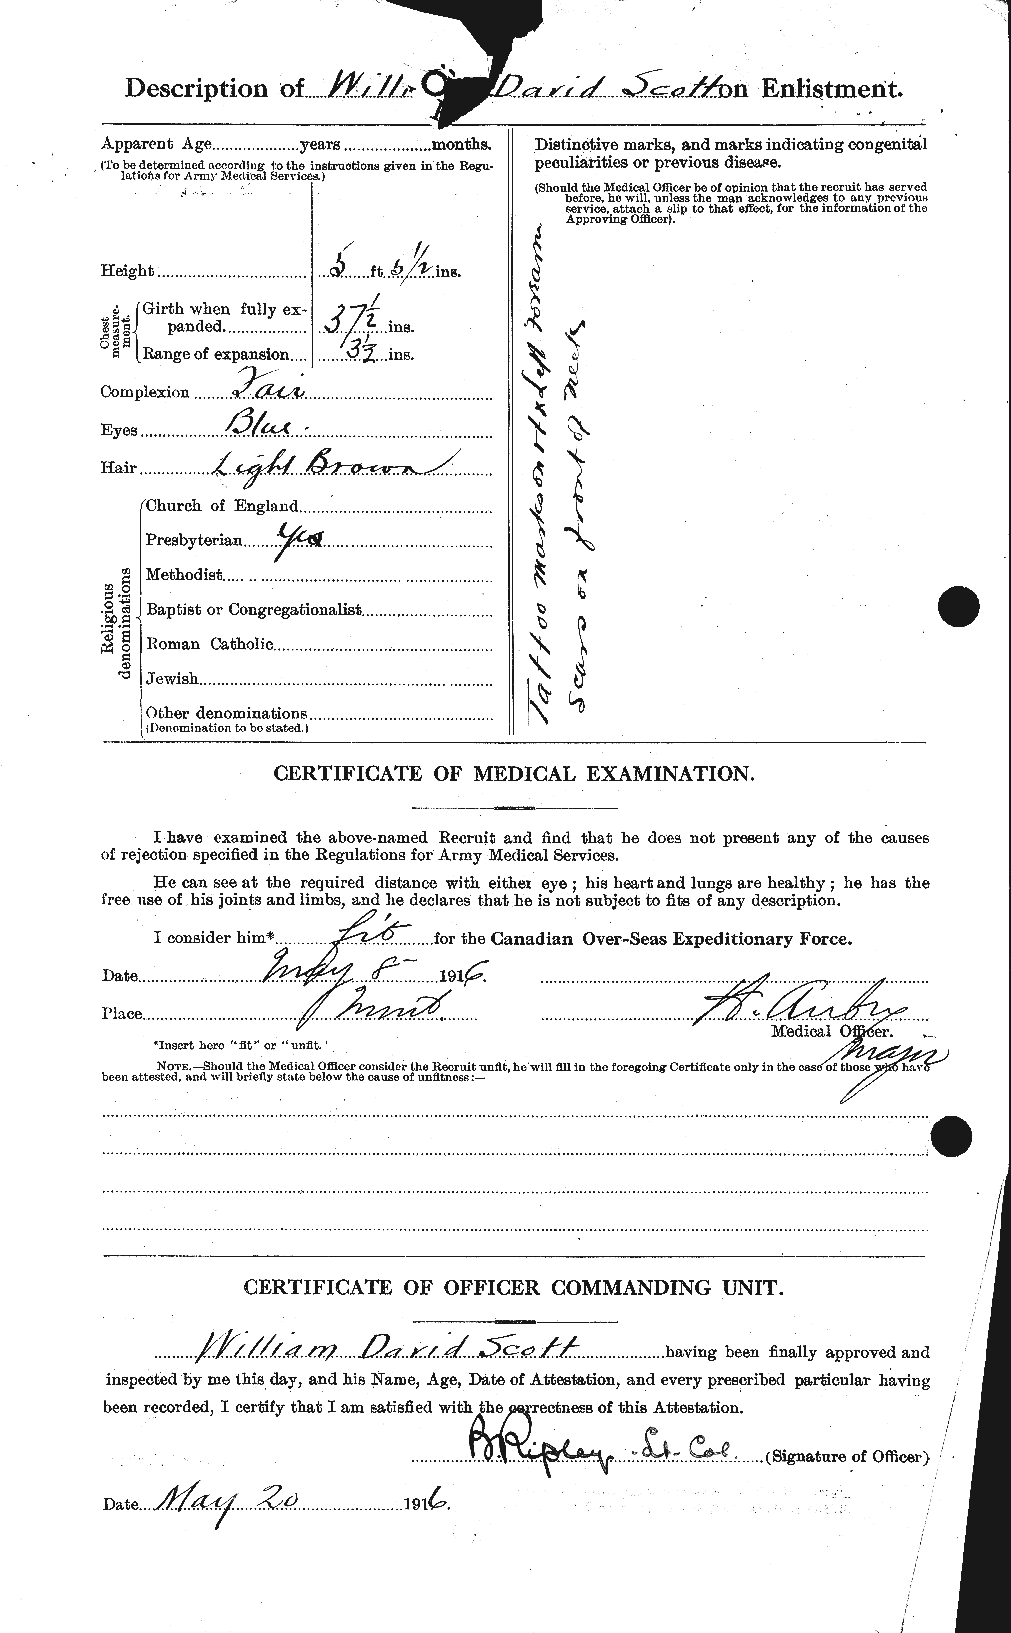 Personnel Records of the First World War - CEF 087033b